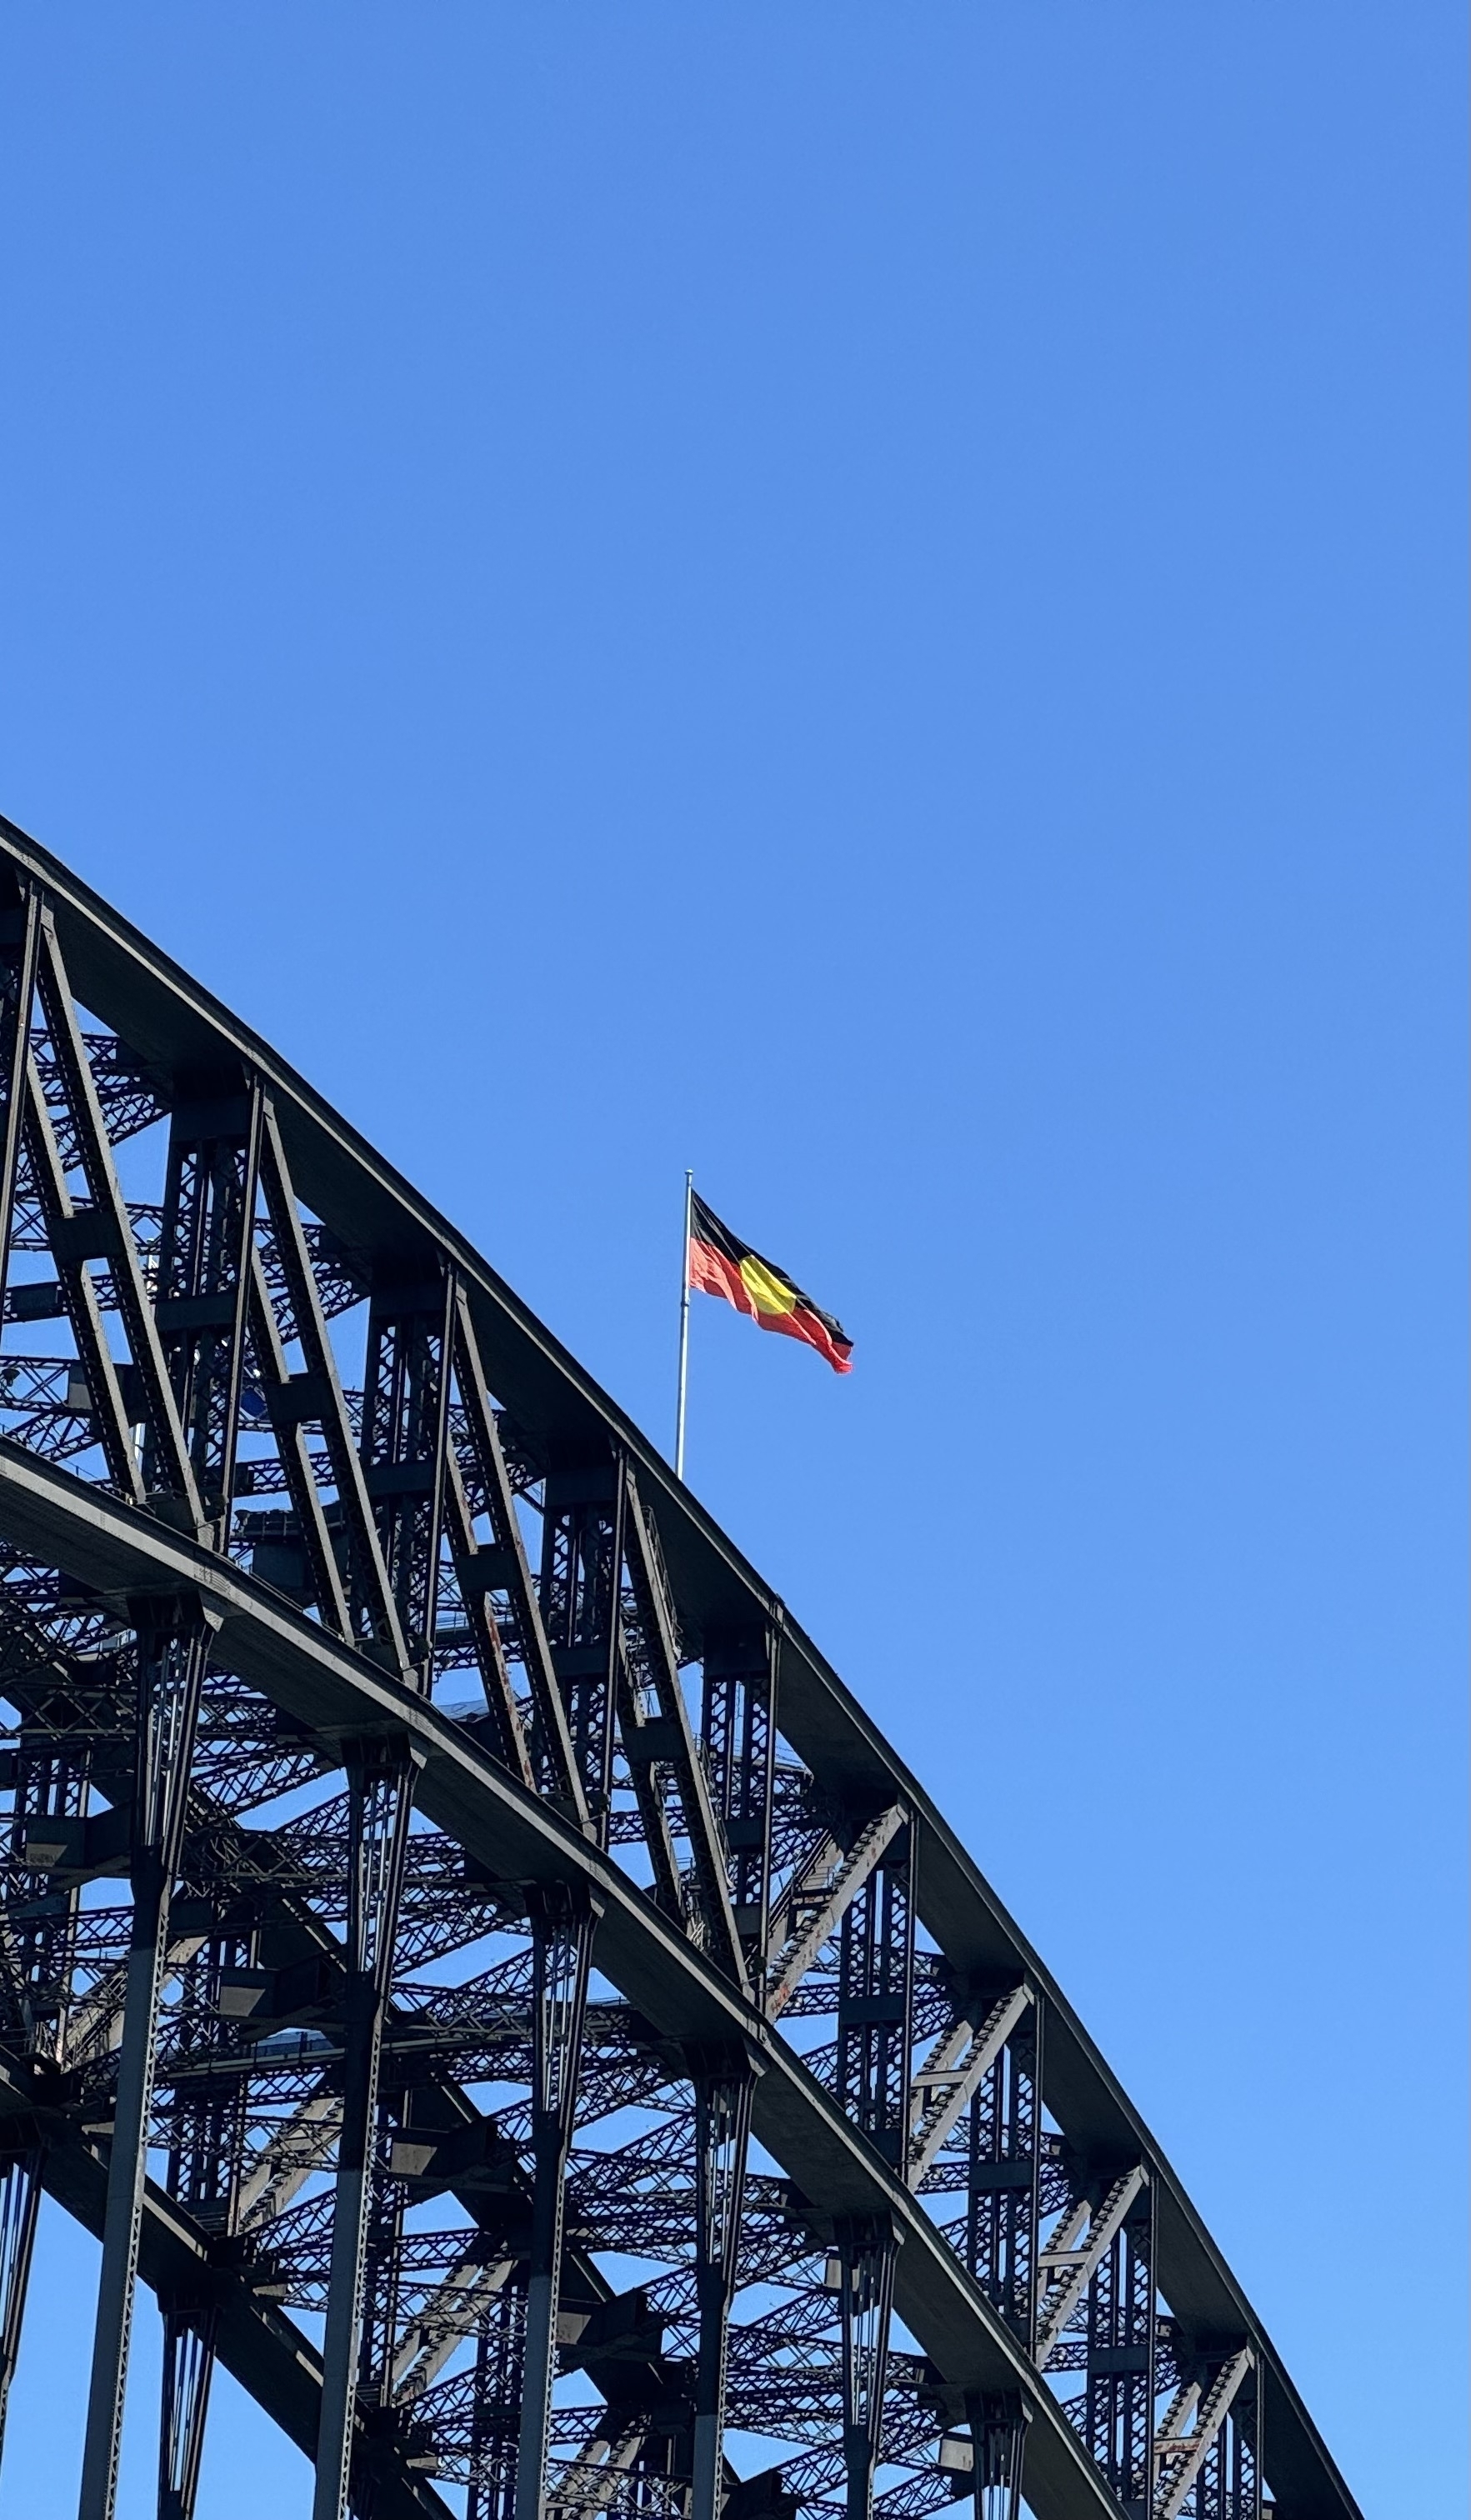 The Australian Aboriginal Flag (bottom half red, top half black, with a yellow circle in the middle) flying from the top of the Sydney harbour bridge. The sky is cloudless and blue.